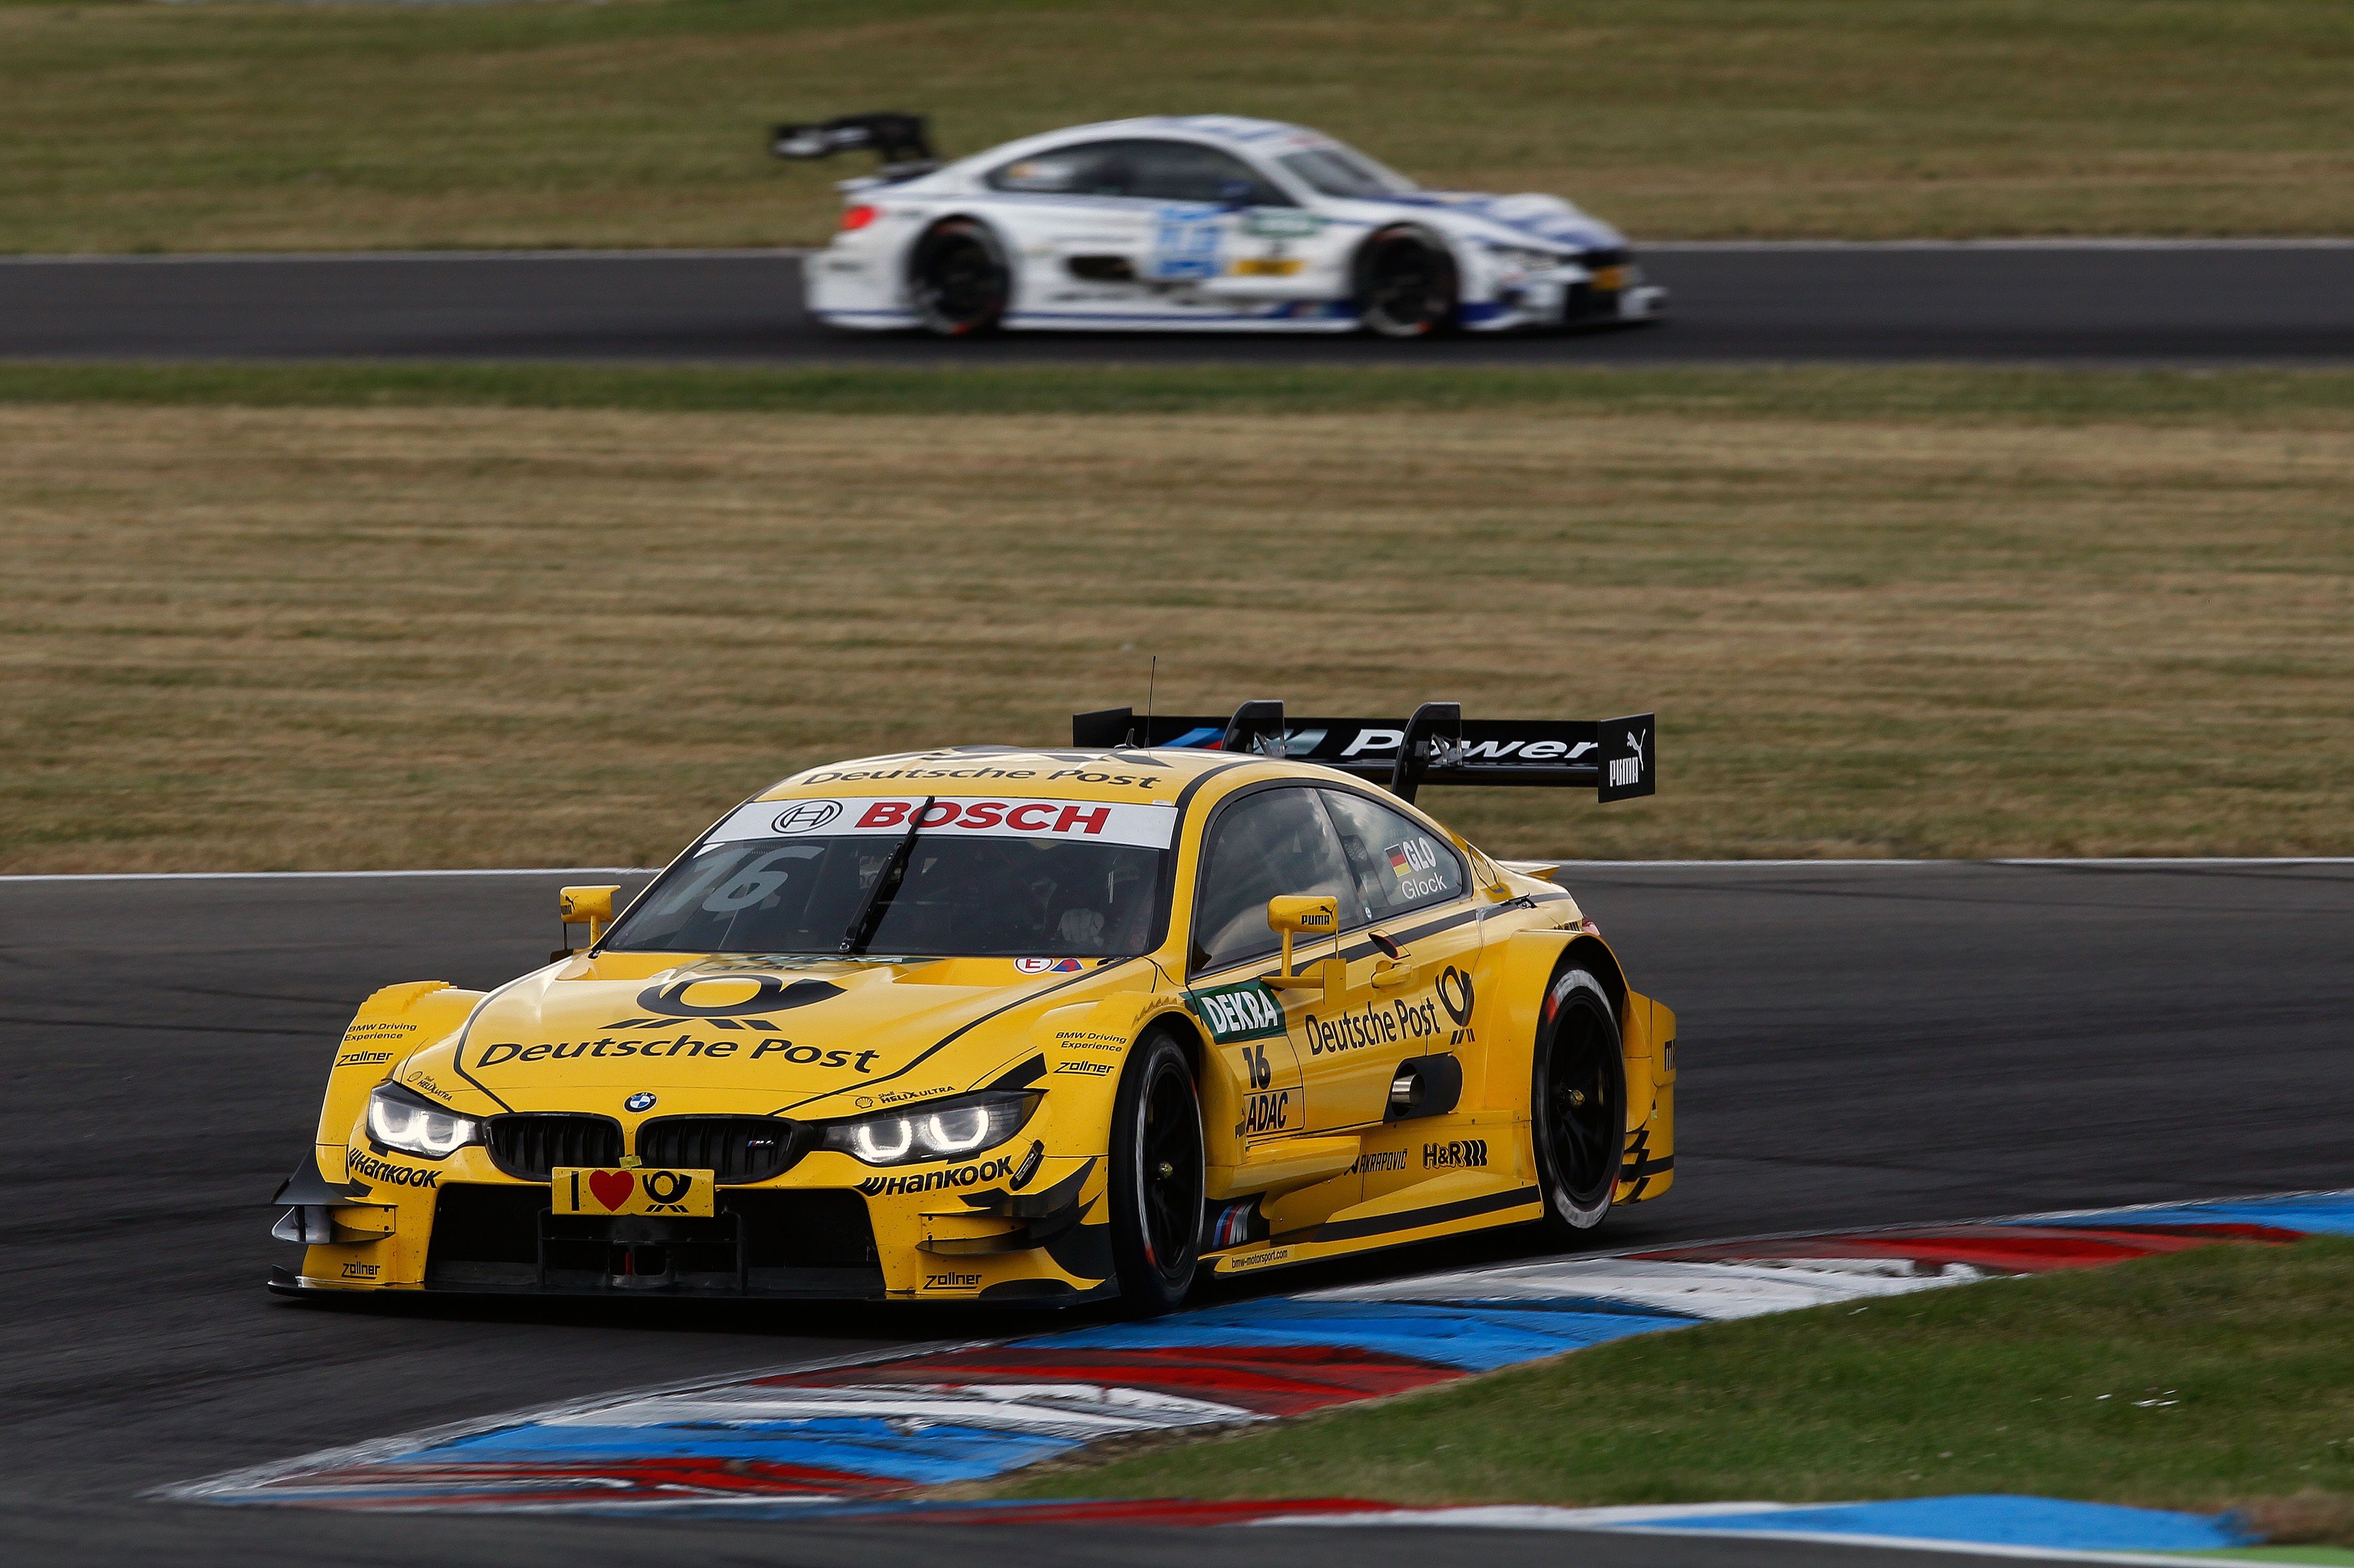 Lausitzring (DE) 29th May 2015. BMW Motorsport, Timo Glock (DE) DEUTSCHE POST BMW M4 DTM and Maxime Martin (BE) SAMSUNG BMW M4 DTM. This image is copyright free for editorial use © BMW AG (05/2015).